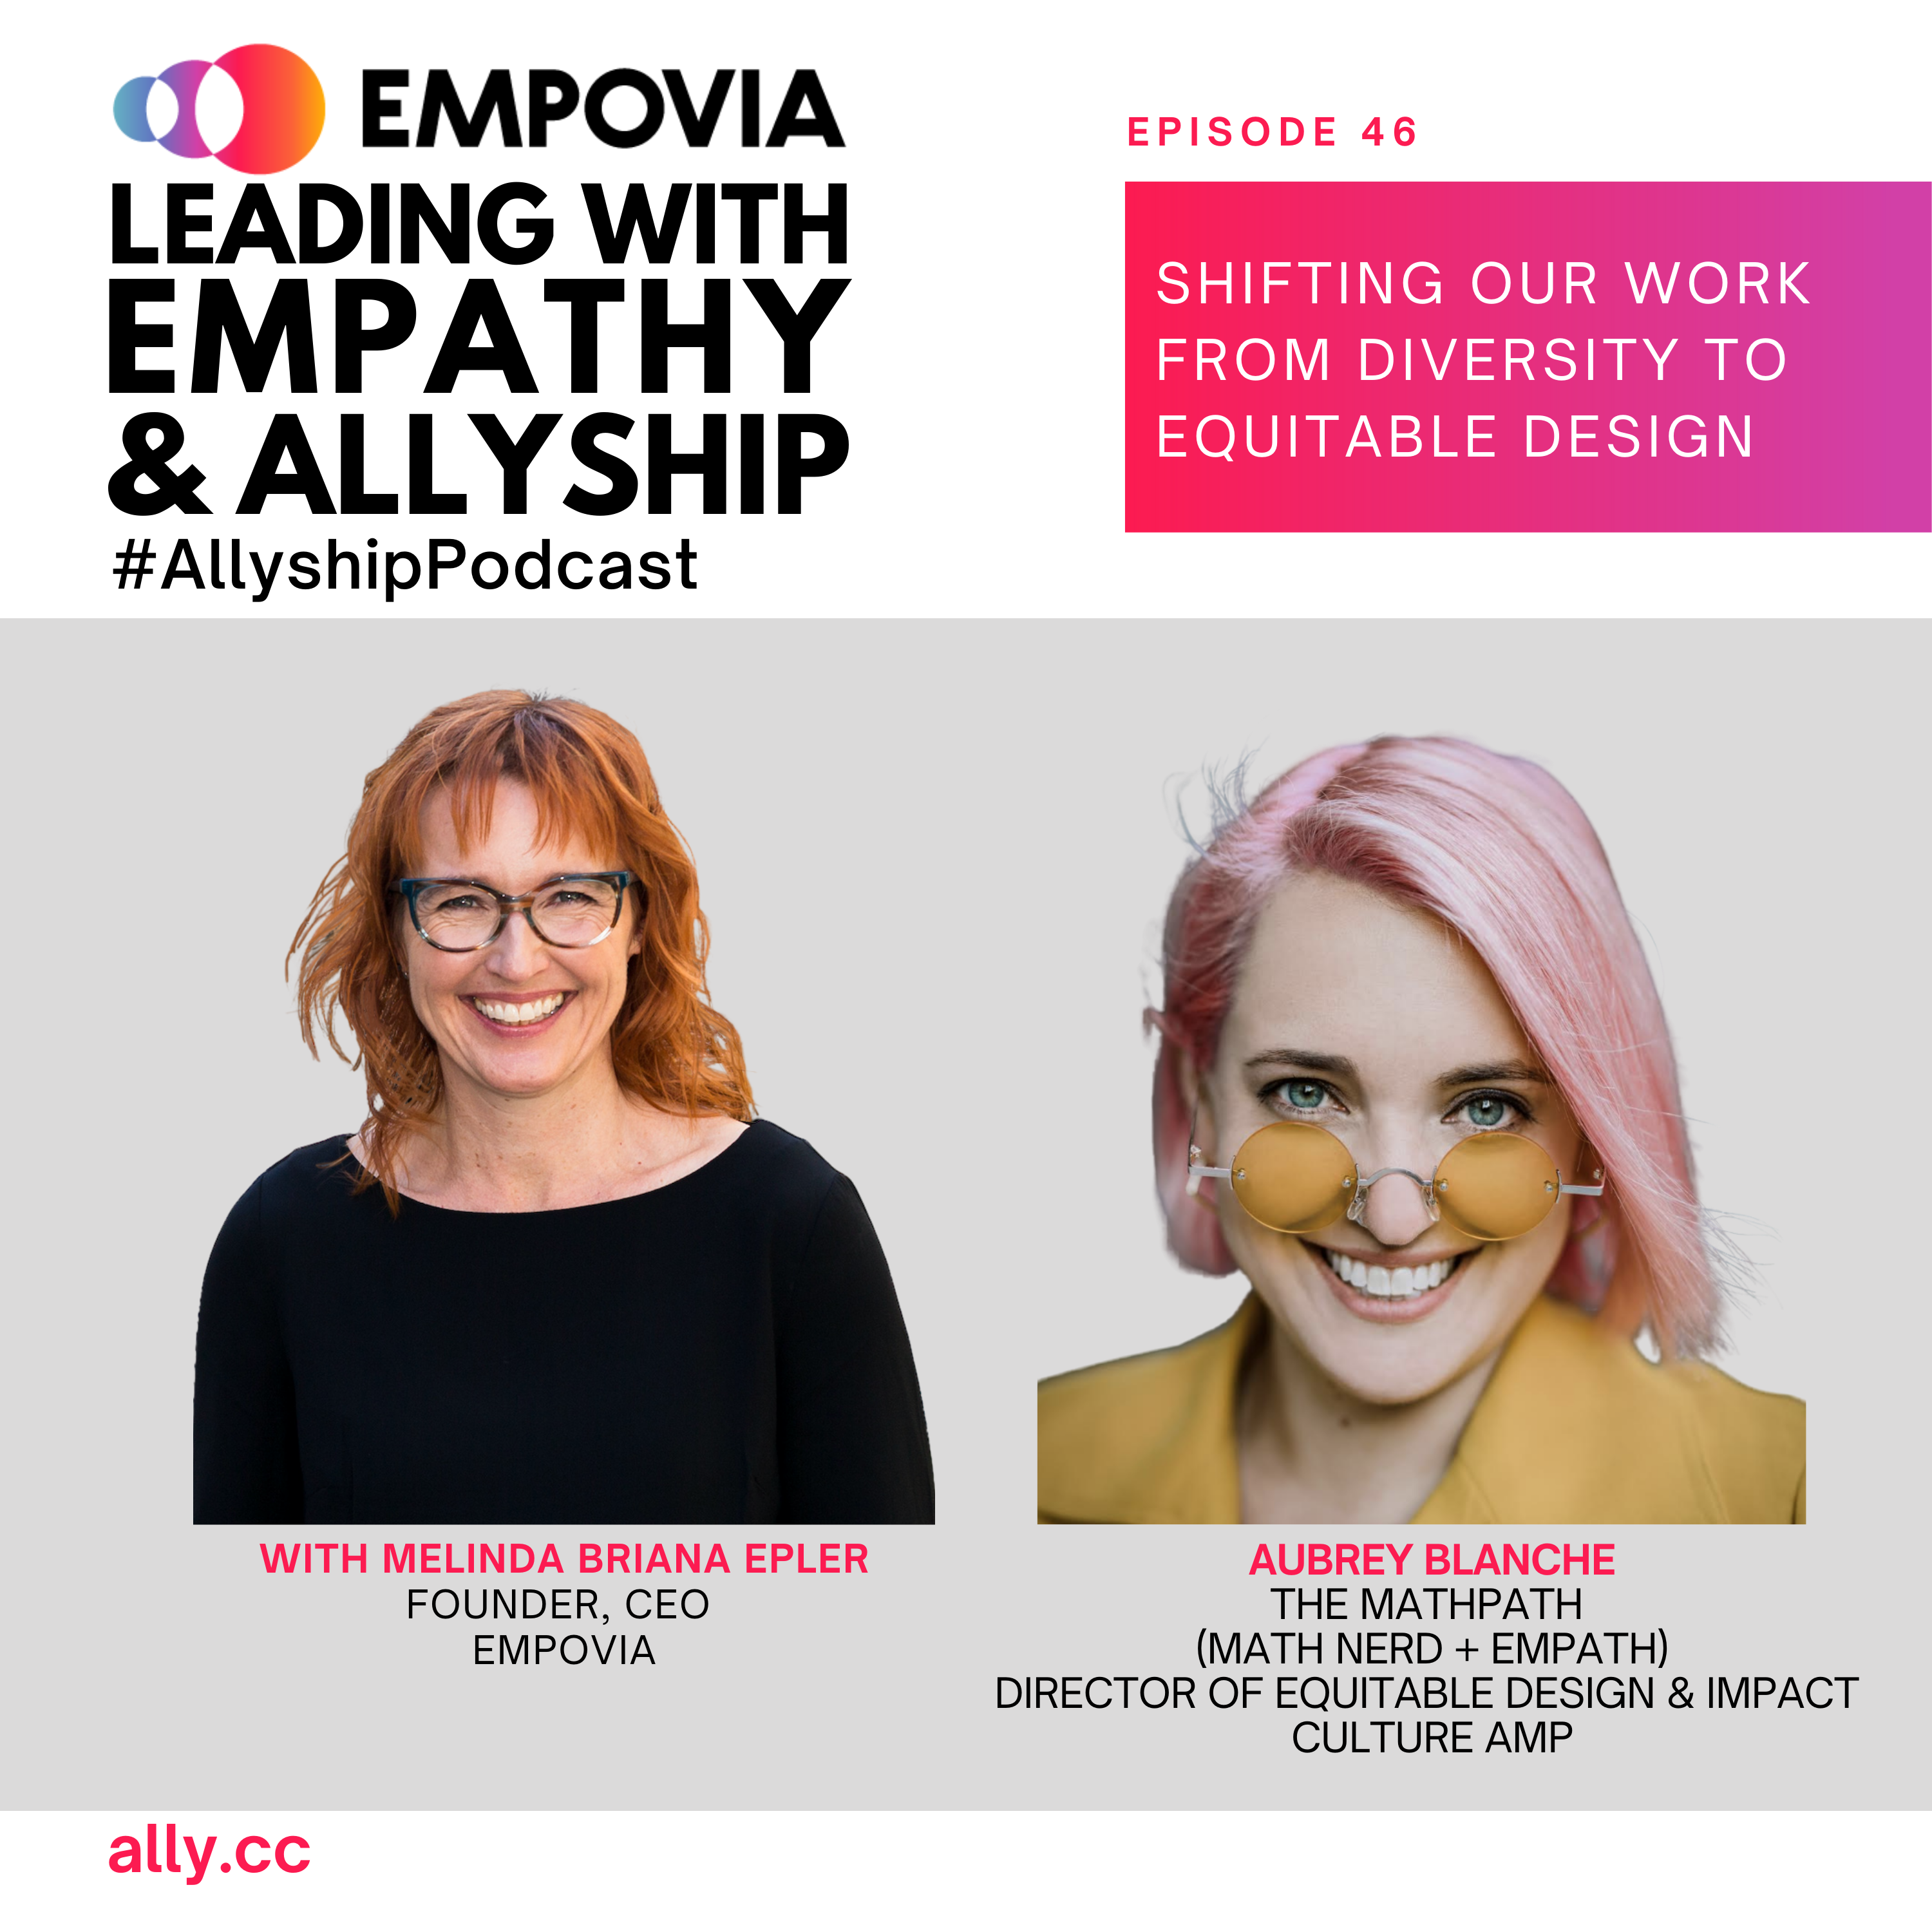 Leading With Empathy & Allyship promo with the Empovia logo and photos of host Melinda Briana Epler, a White woman with red hair and glasses, and Aubrey Blanche, a Latina with pink hair, glasses, and yellow shirt.